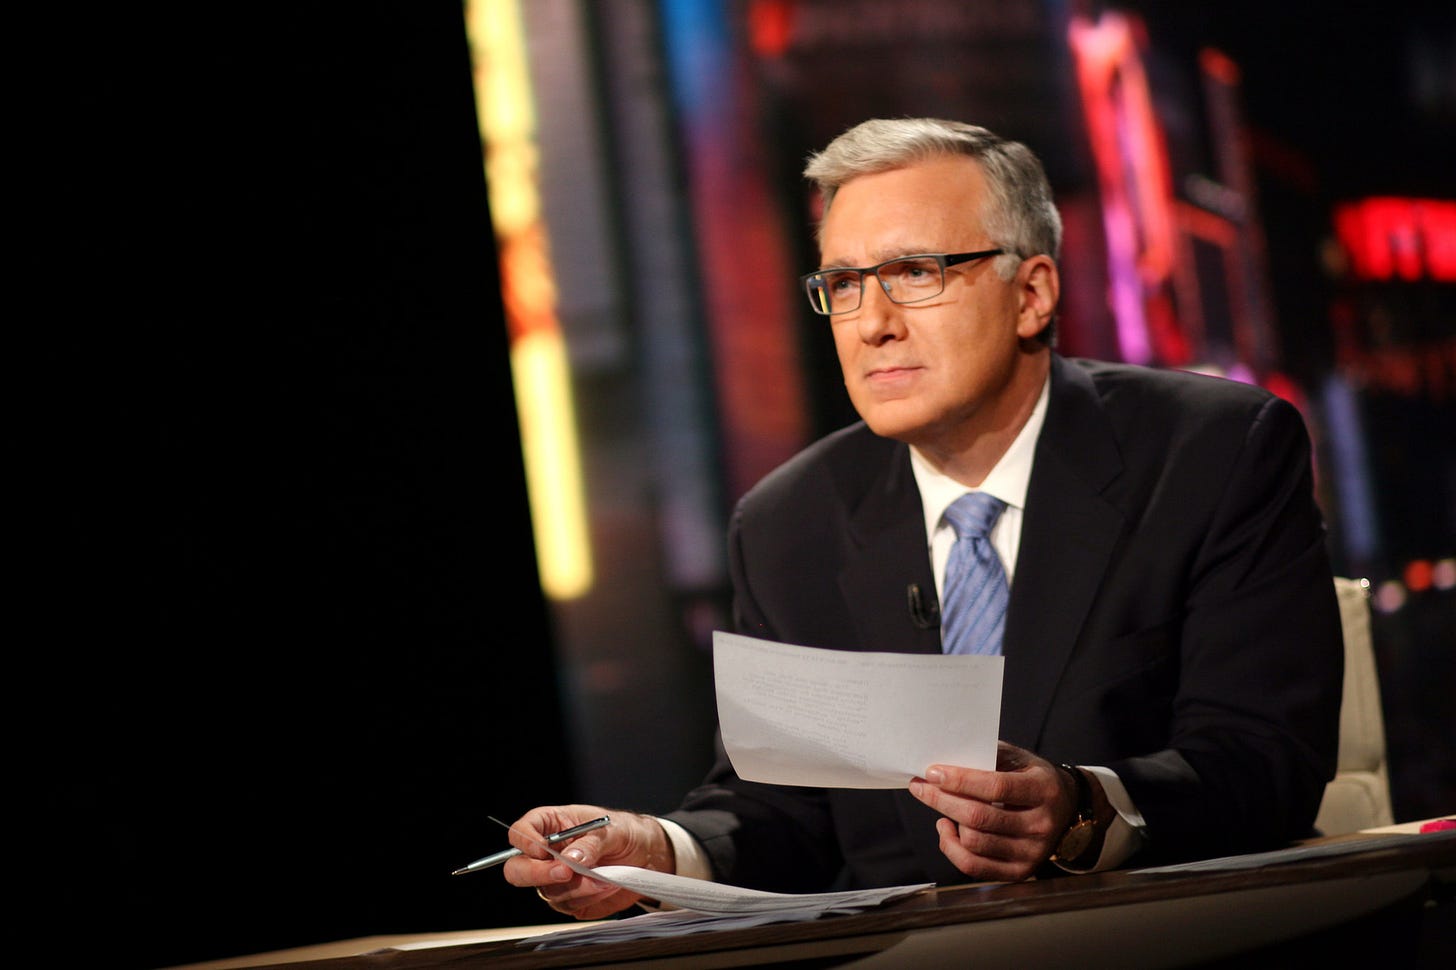 Olbermann Set to Return to ESPN and Sports News - The New York Times